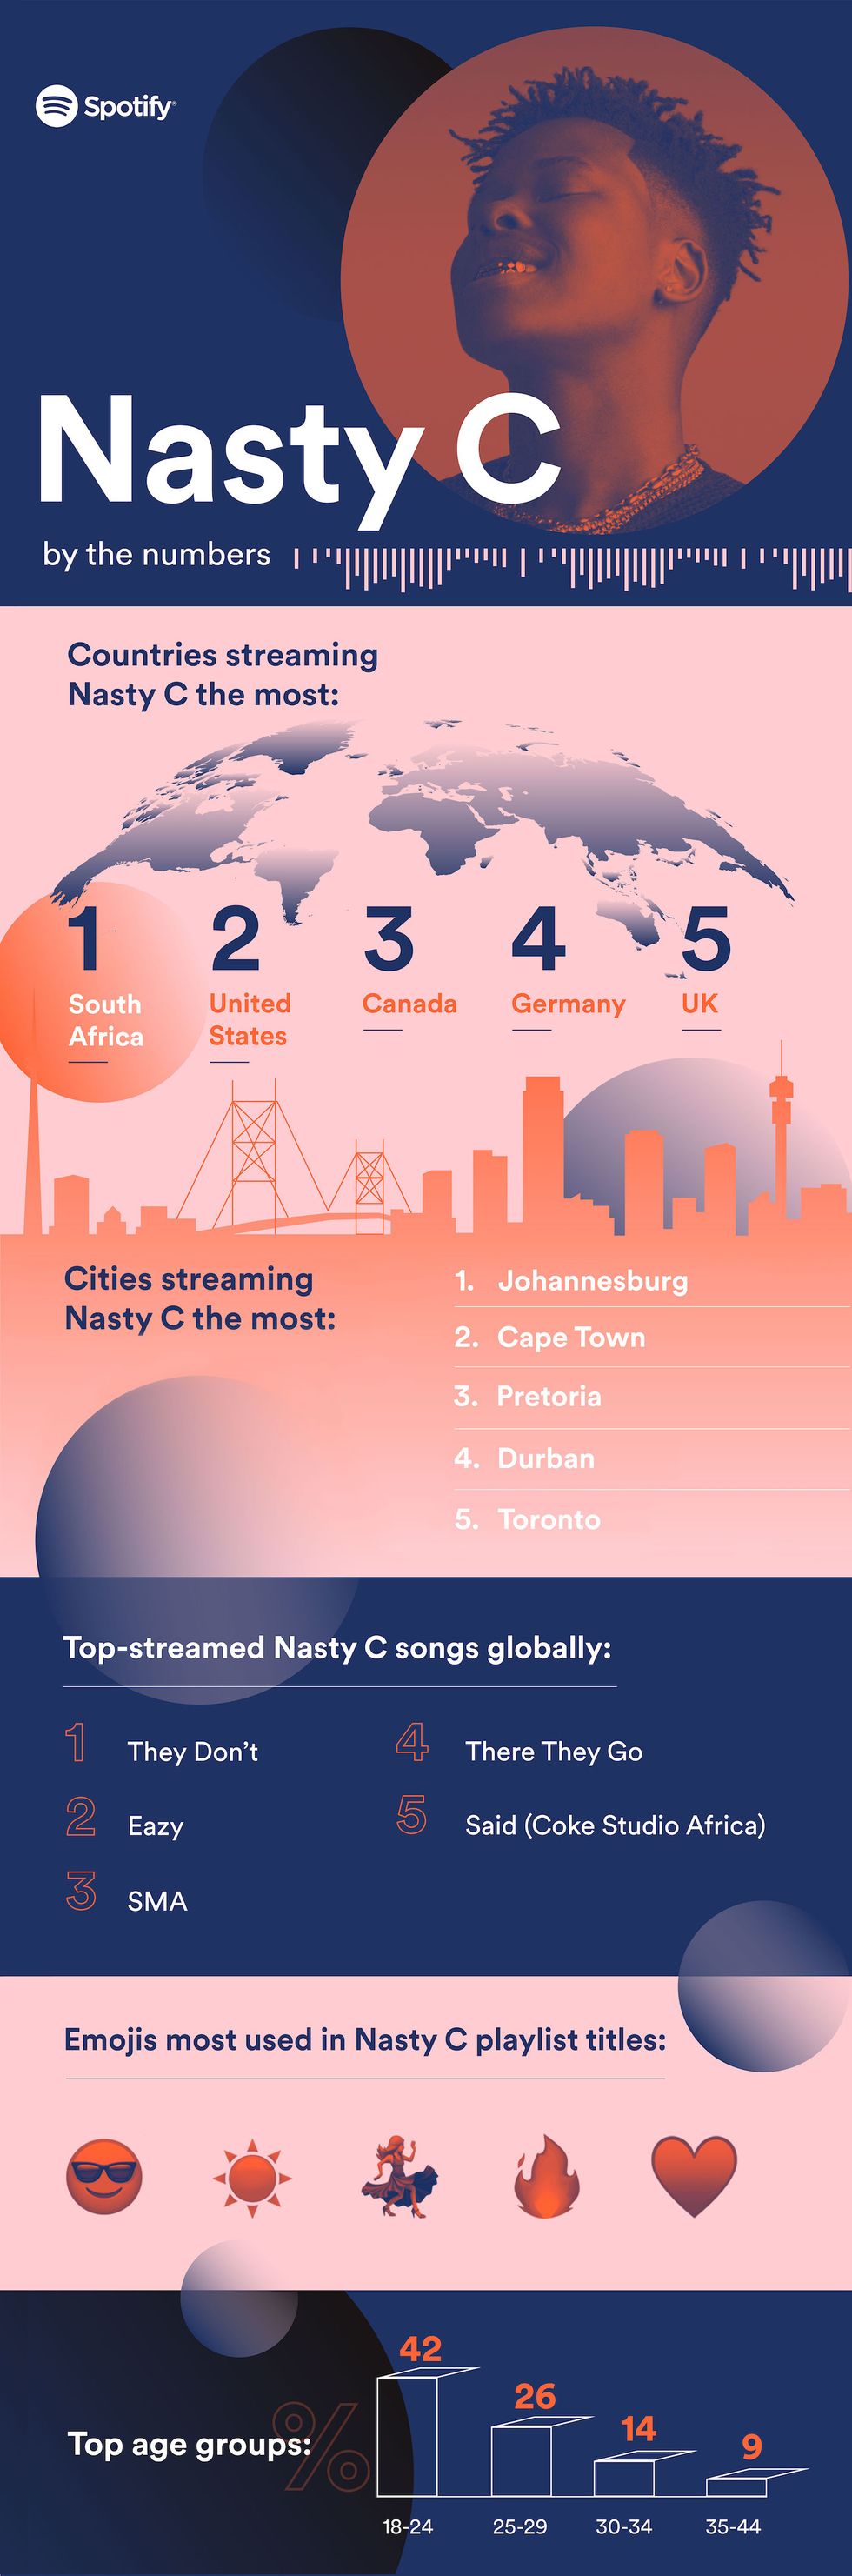 An infographic showing some interesting stats on Nasty C based on activity on Spotify. 